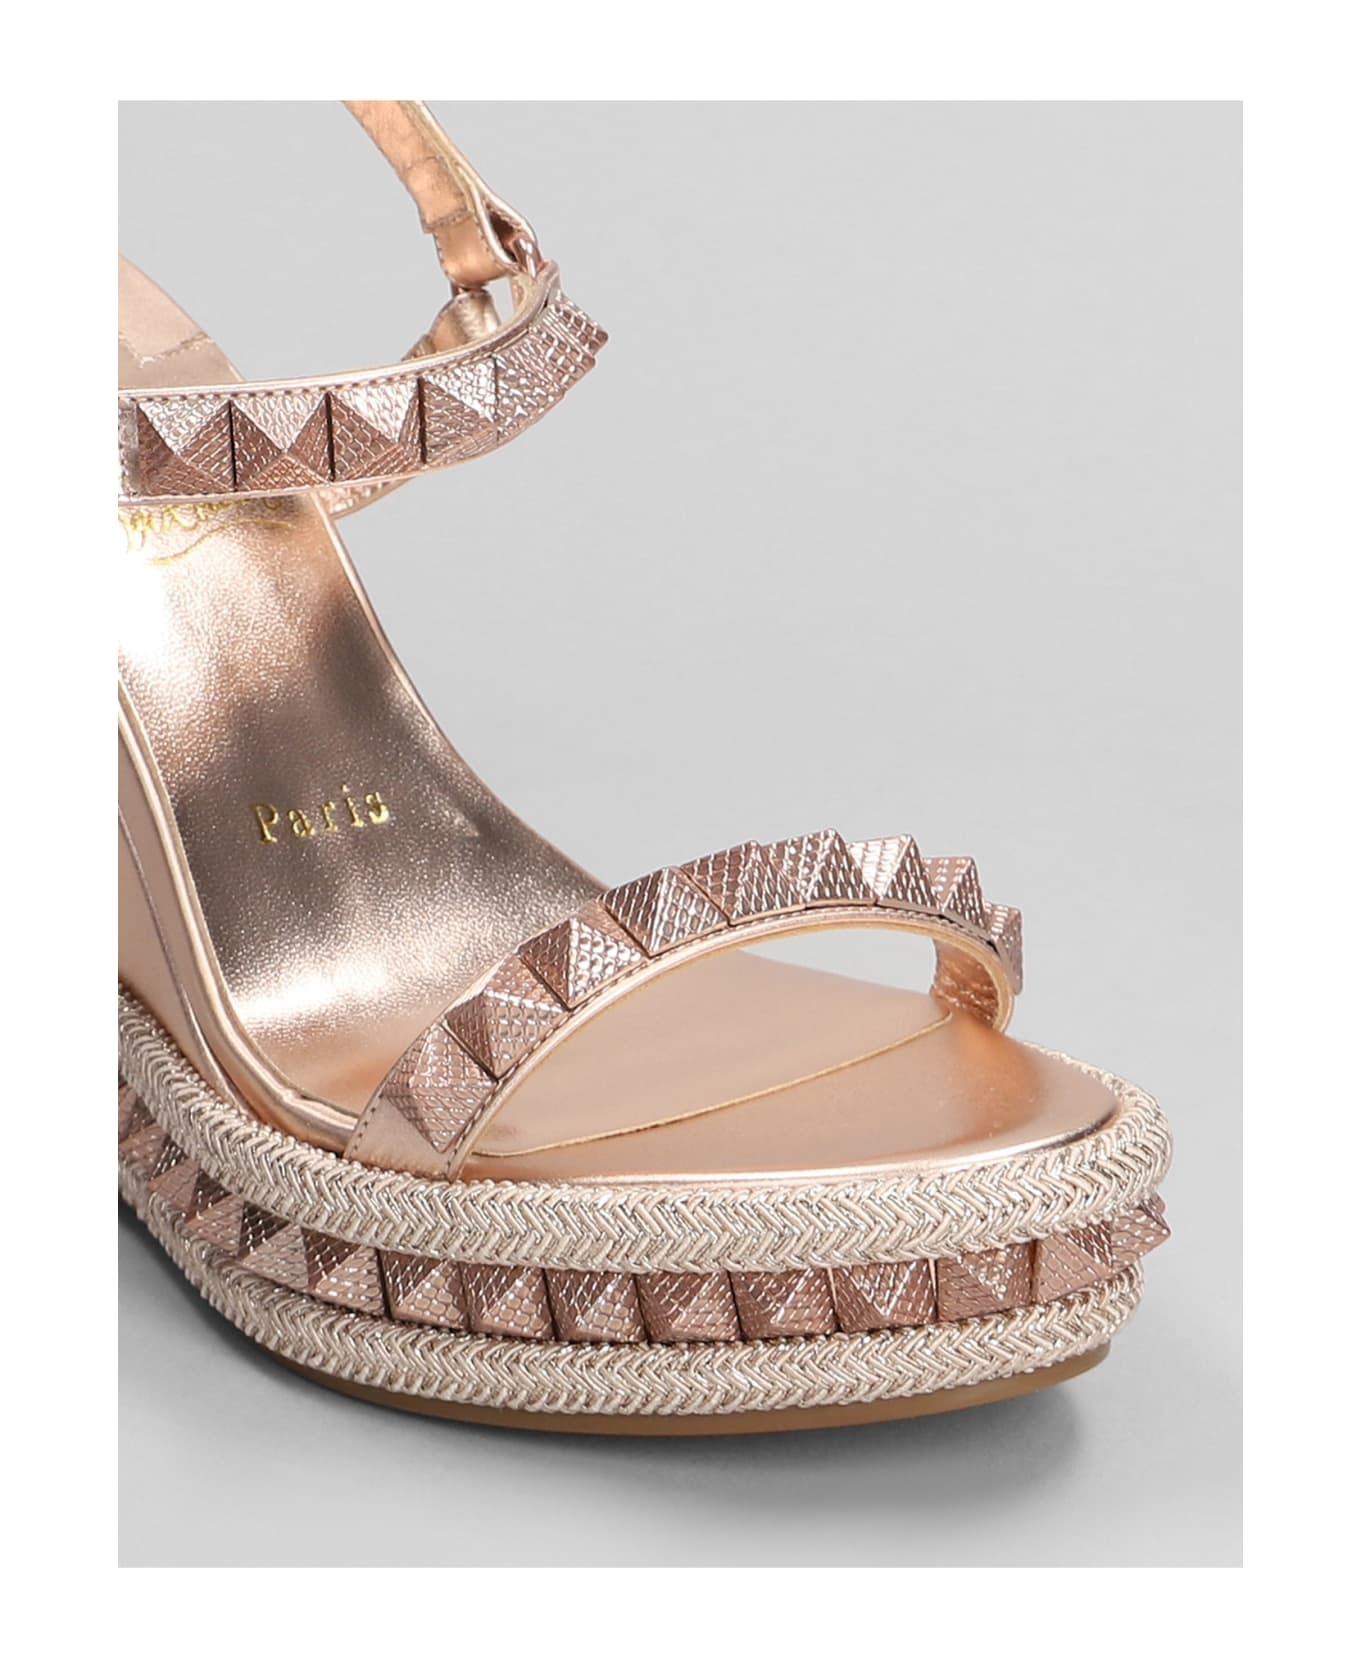 Pyraclou 110 Sandals In Rose-pink Leather - 5